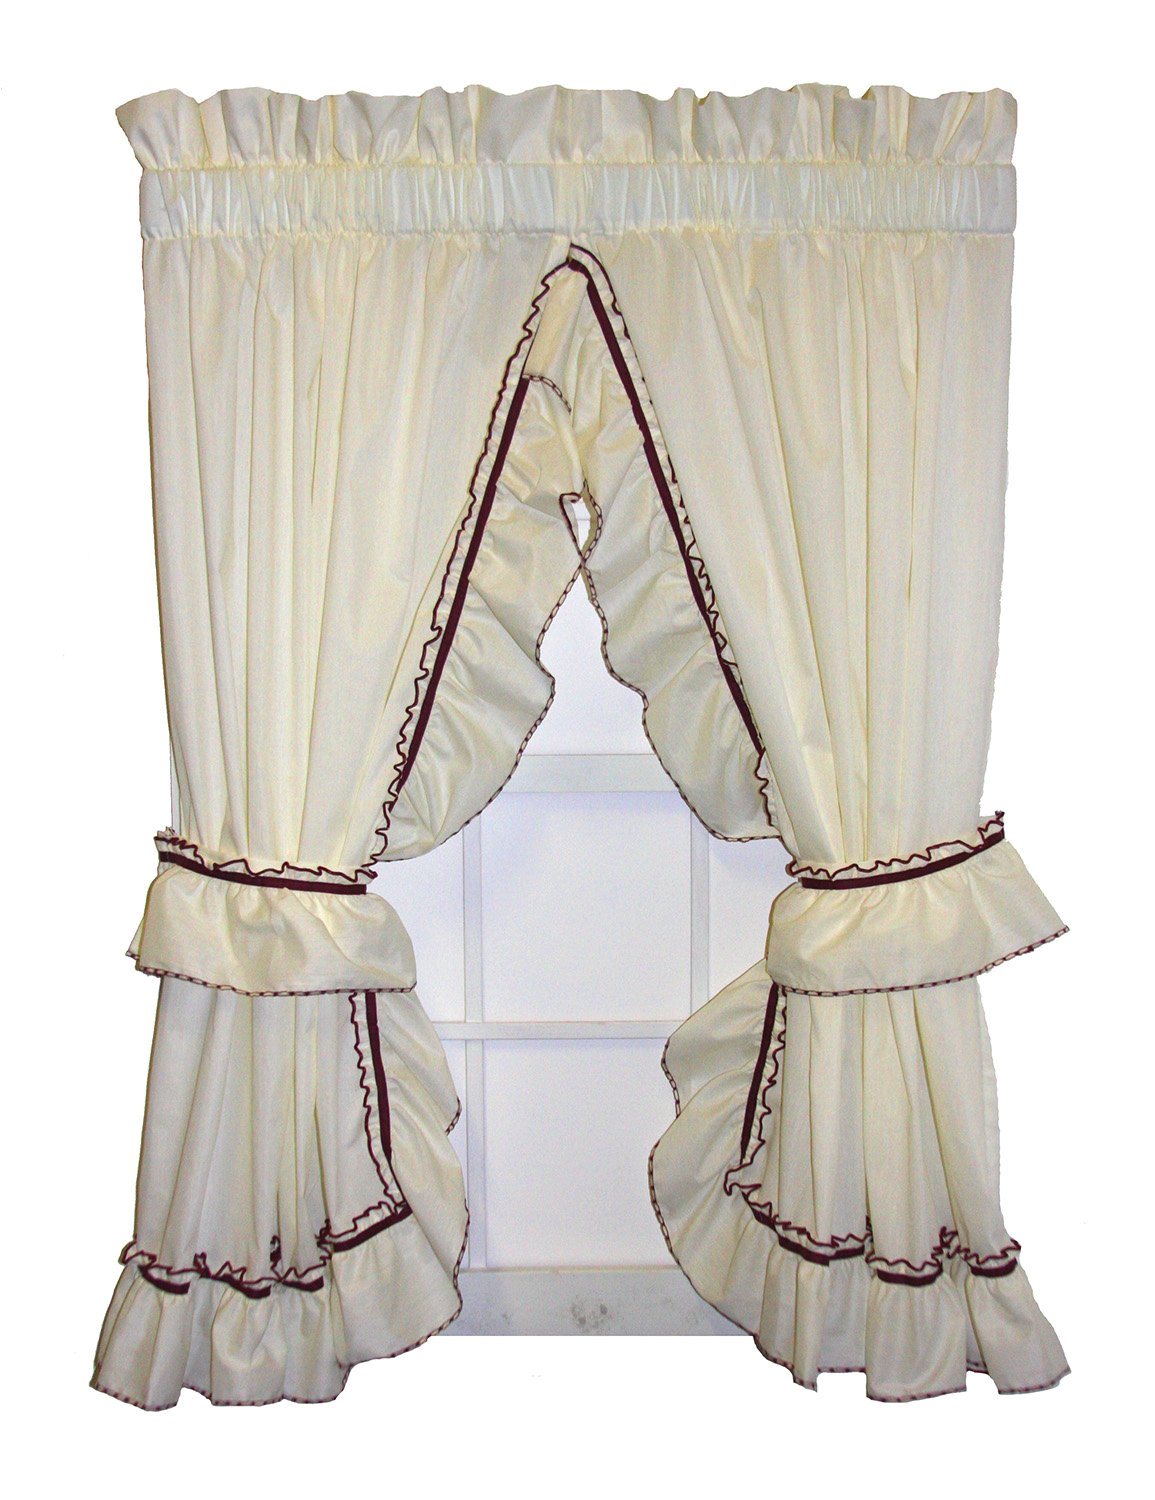 jenny country ruffled priscilla window curtains with tie backs